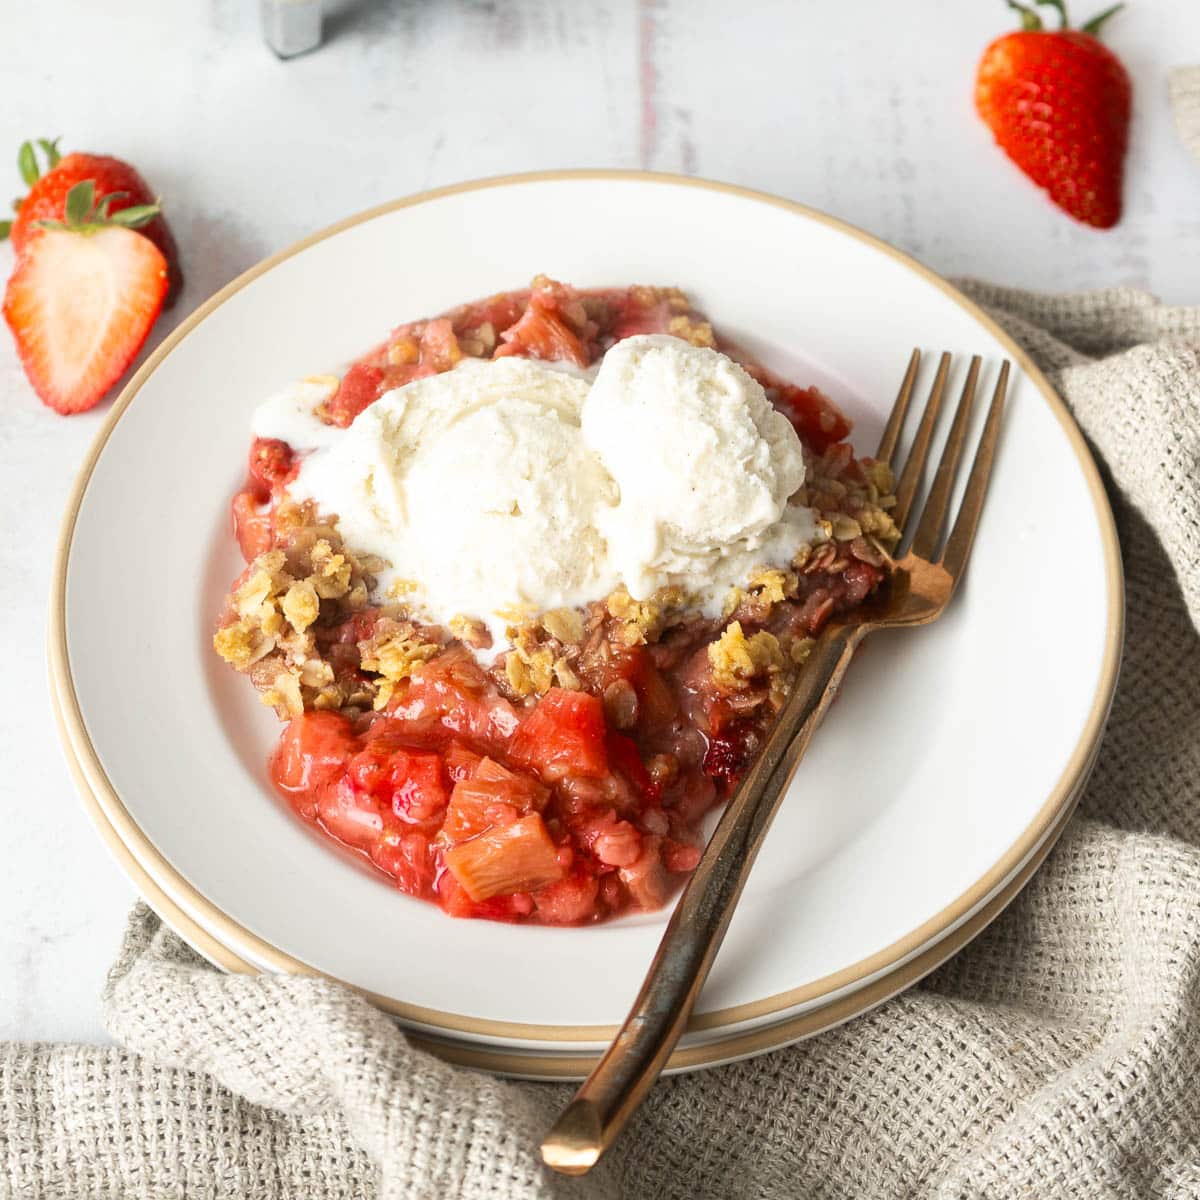 Strawberry crisp on a white plate with a fork.